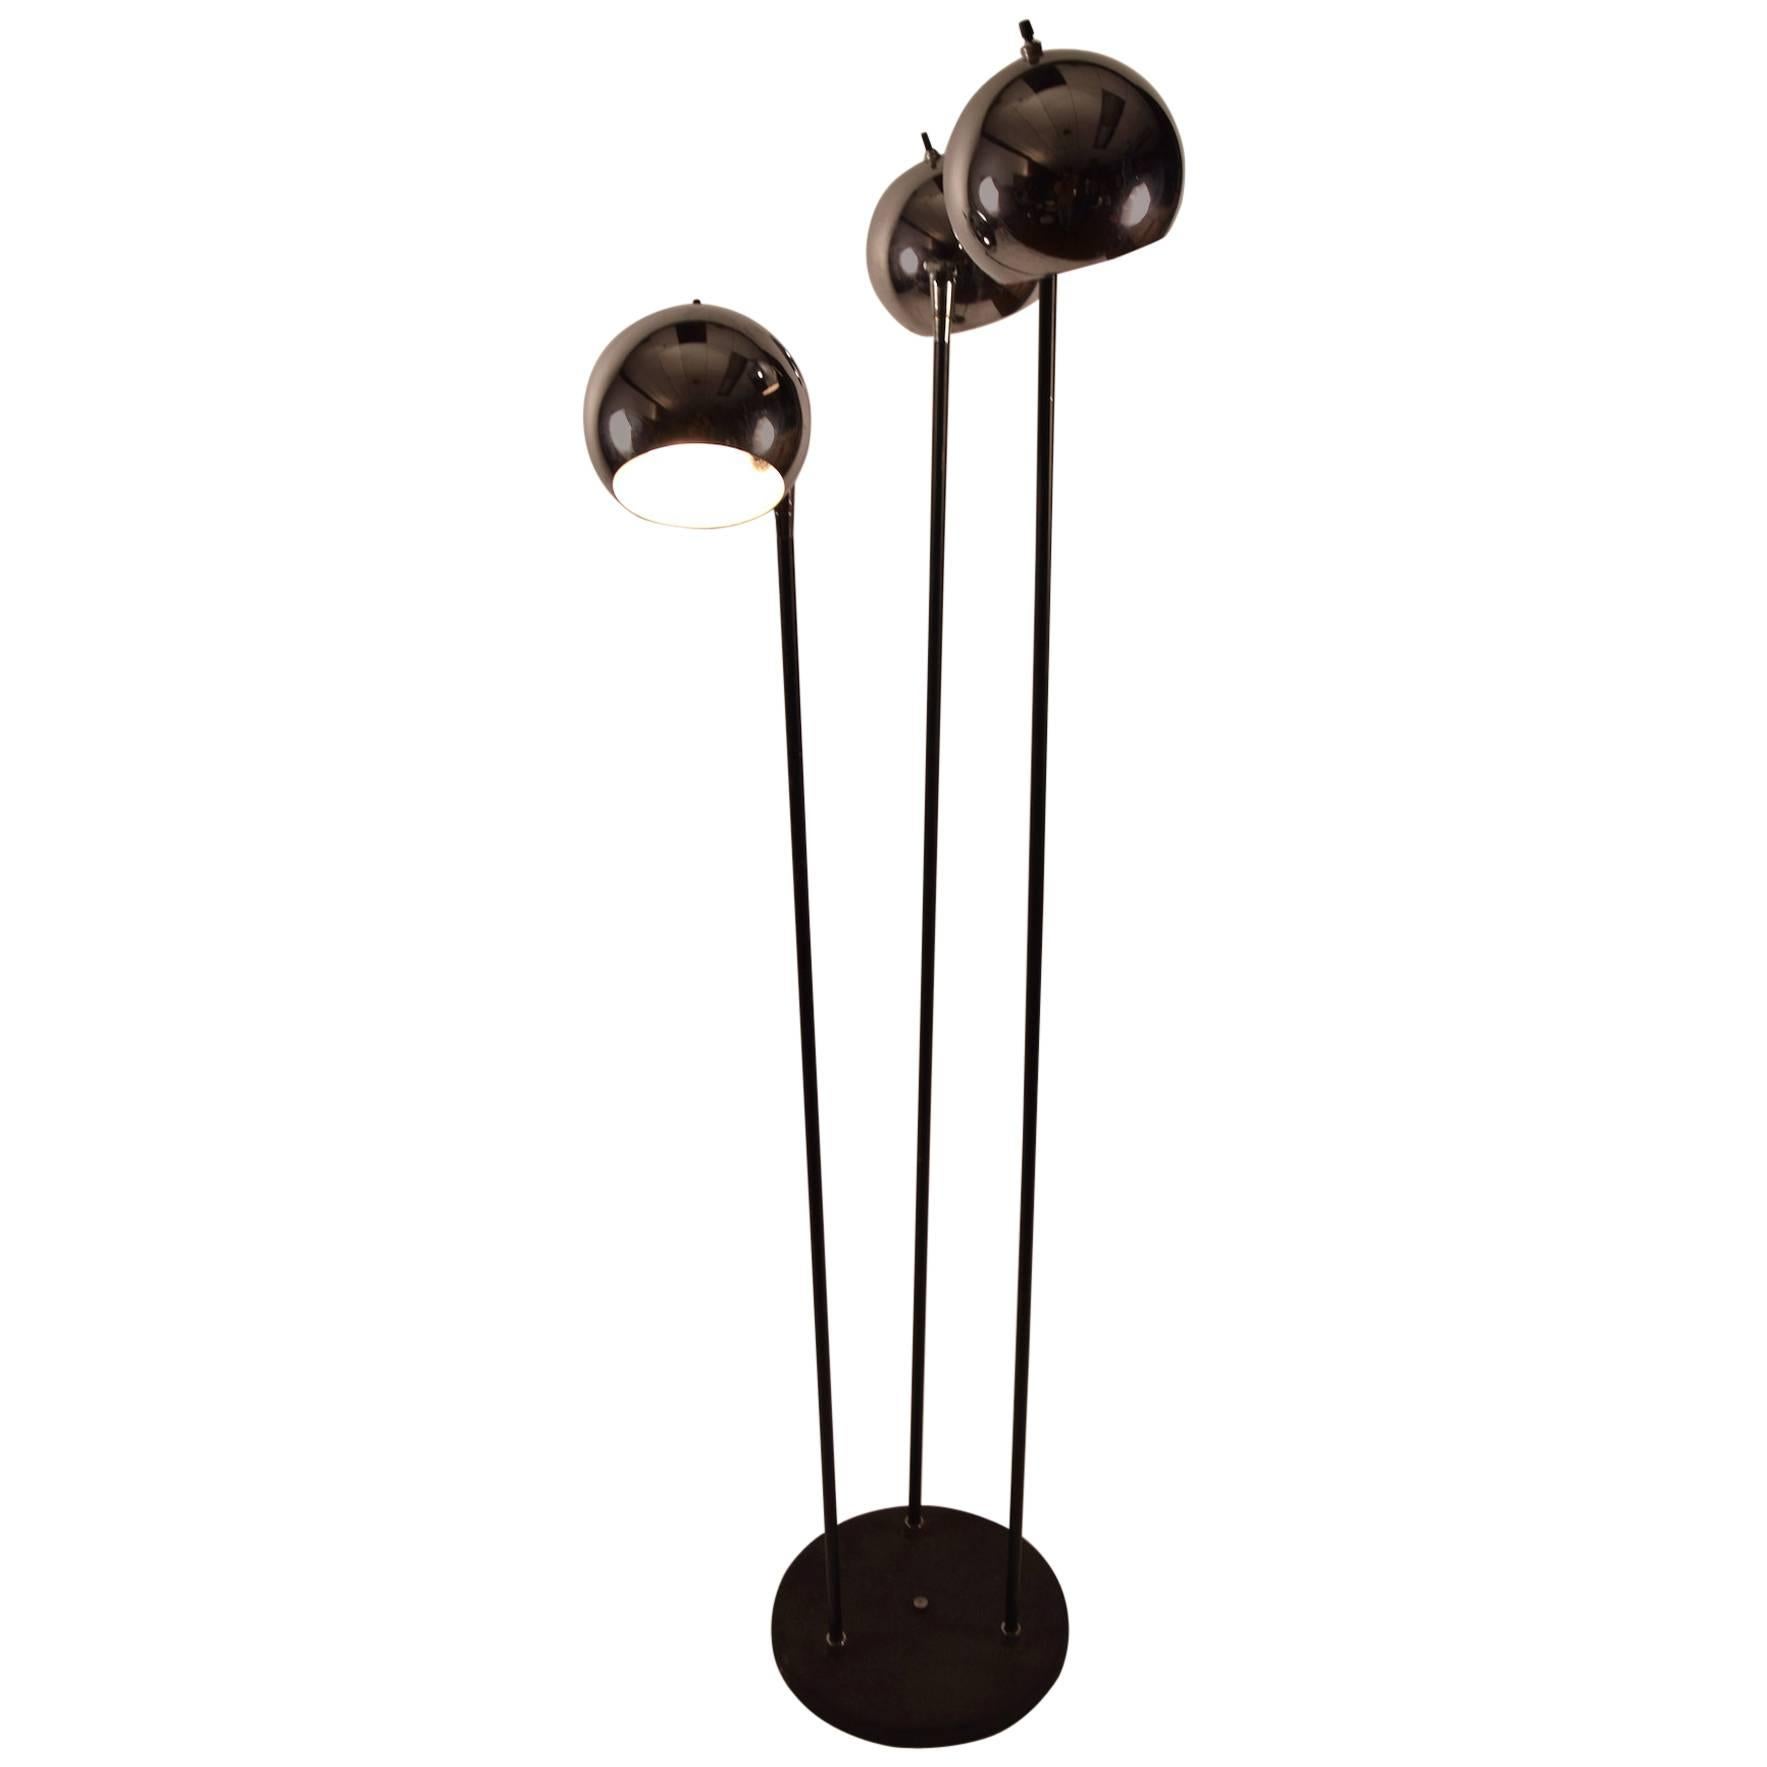 Chrome Ball Adjustable Floor Lamp with Black Base and Stems For Sale